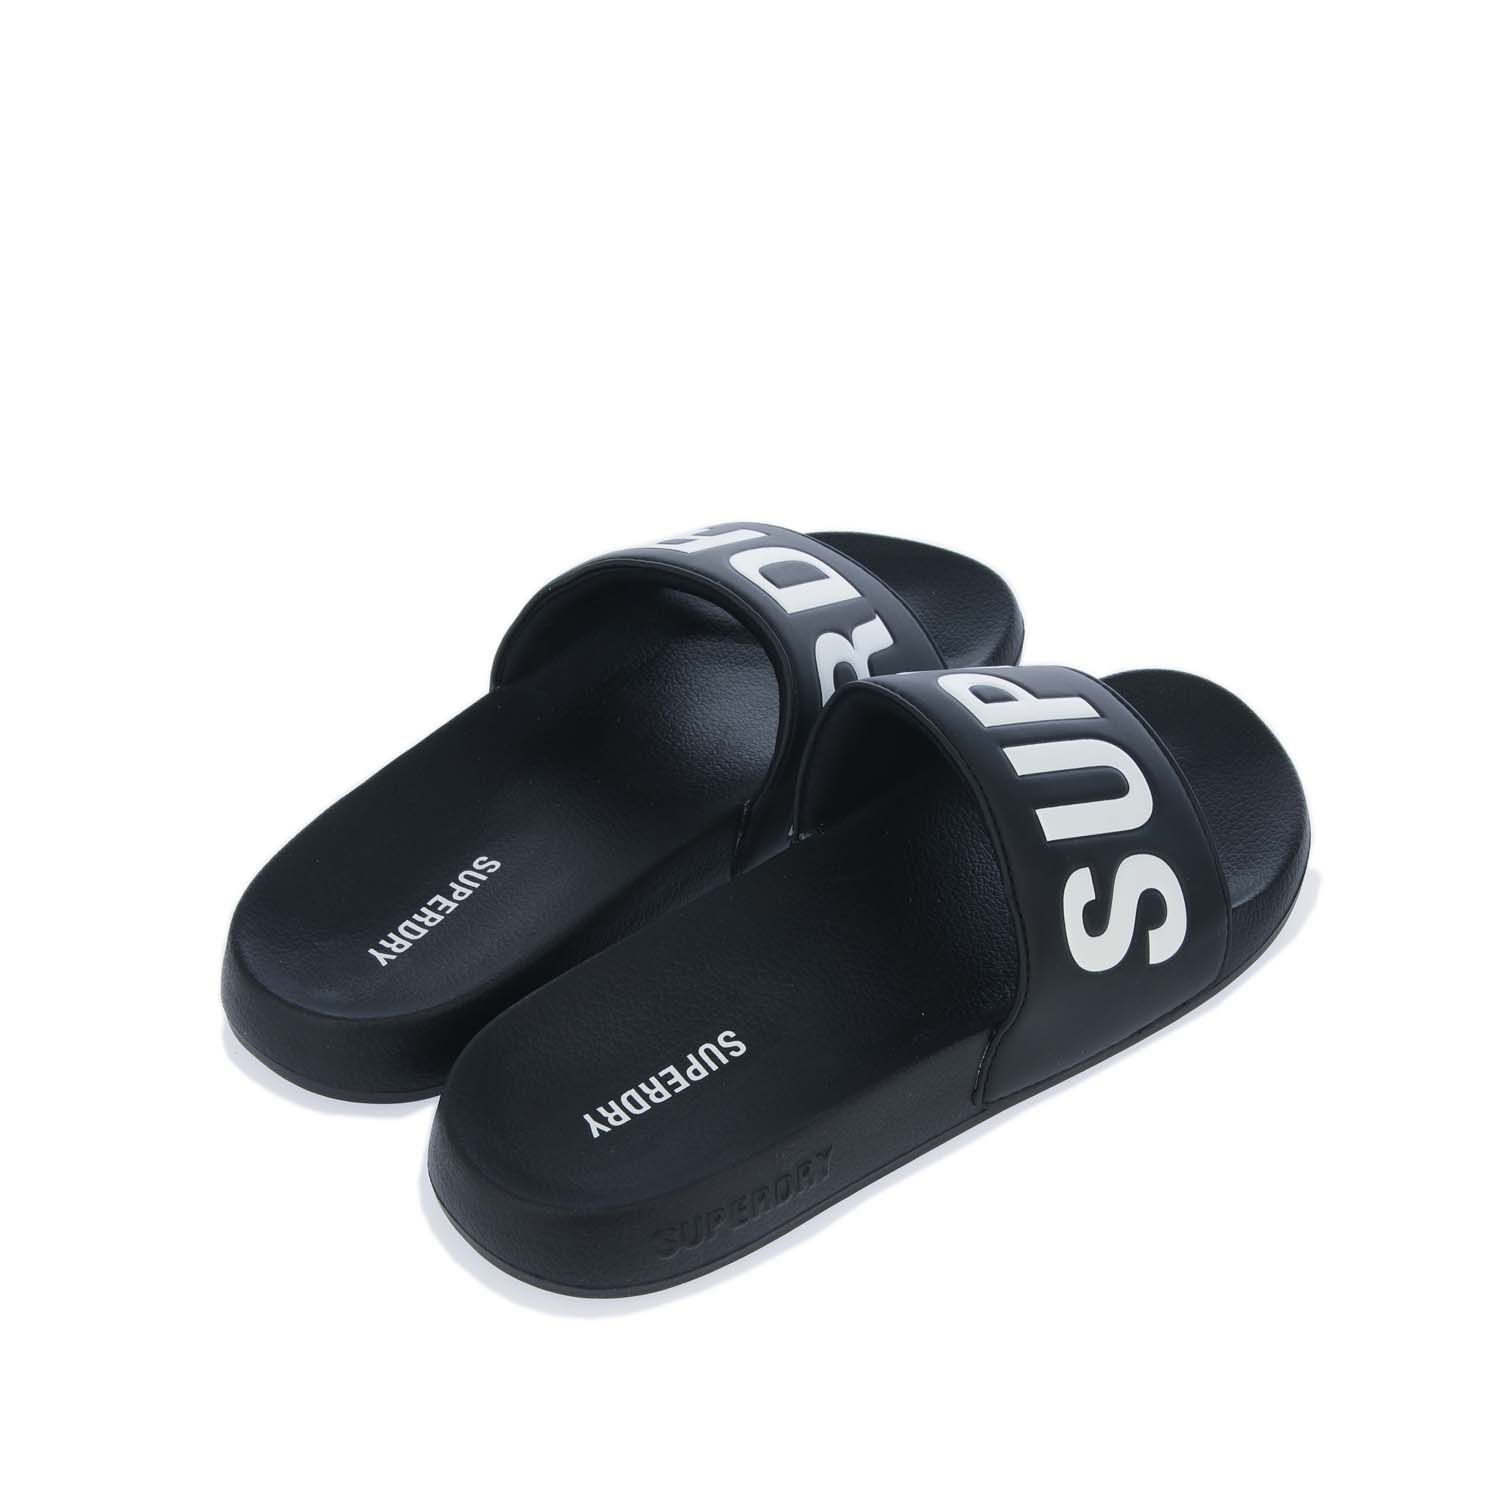 Mens Superdry Code Core Pool Slides in black.- Synthetic upper.- Slip on fastening.- Embossed Superdry logo on side.- Branded footbed.- Moulded sole with a Superdry logo.- Synthetic upper  Textile and synthetic lining.- Ref: MF310199A33B